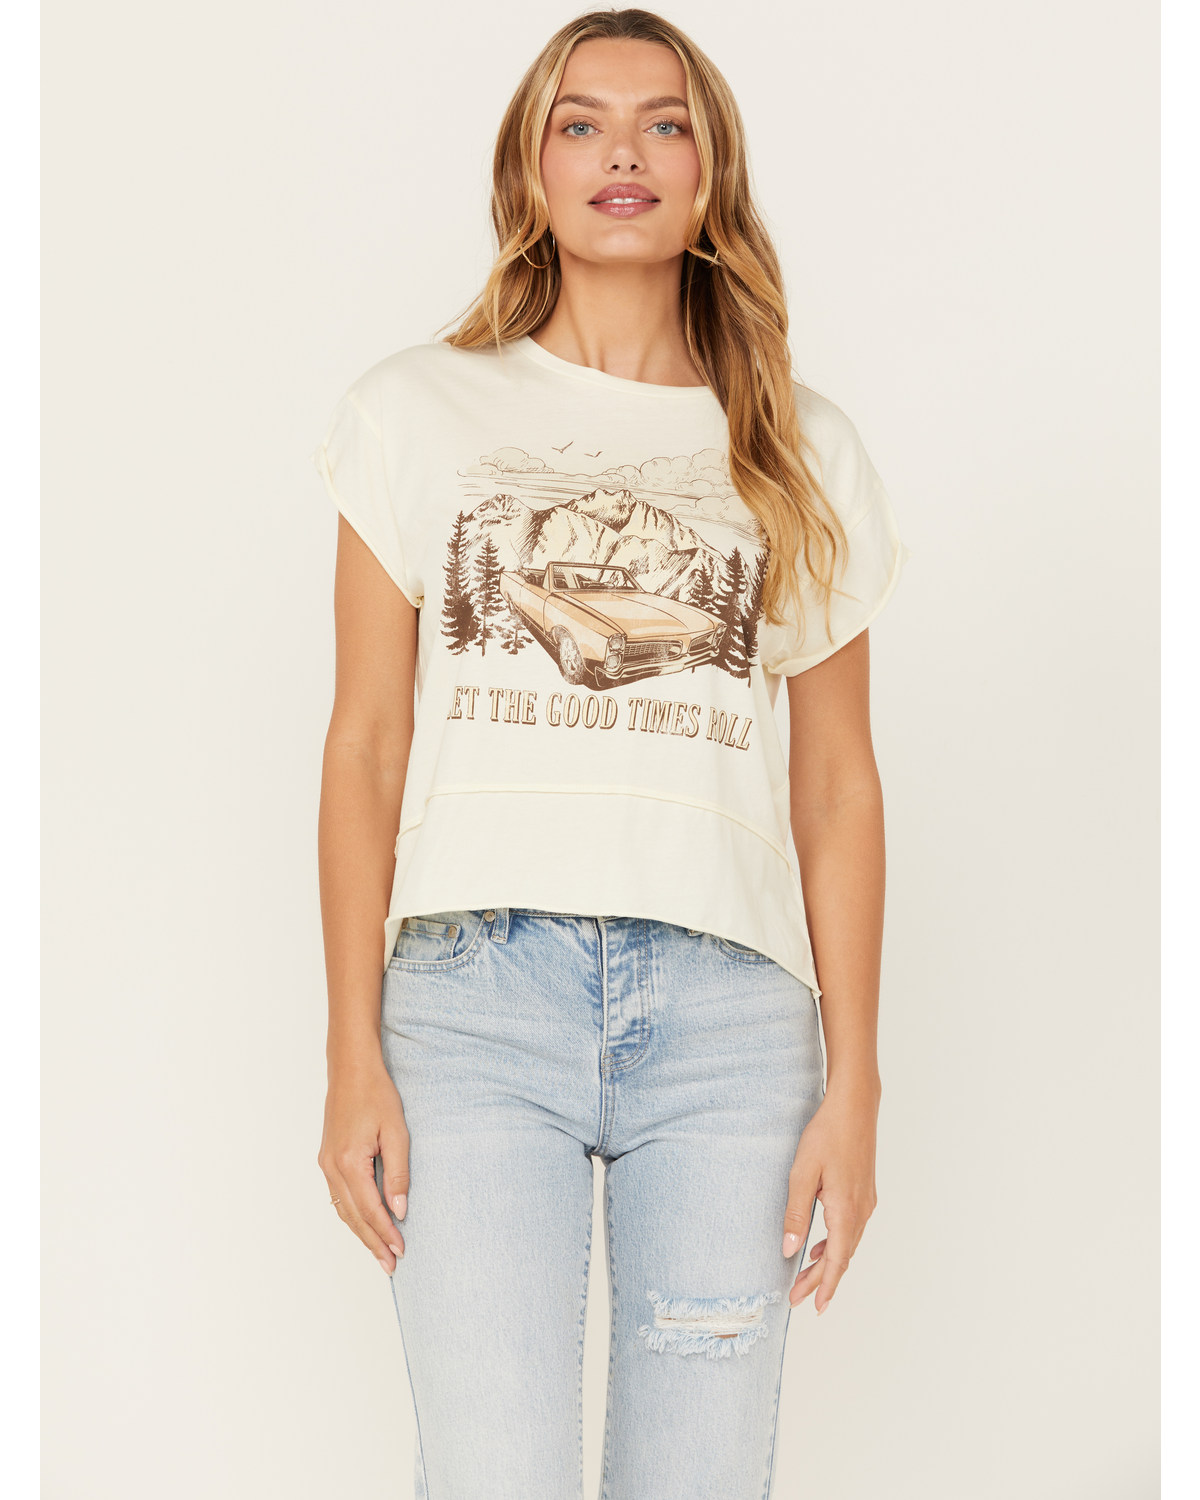 Cleo + Wolf Women's Let The Good Times Roll Seamed Short Sleeve Graphic Tee